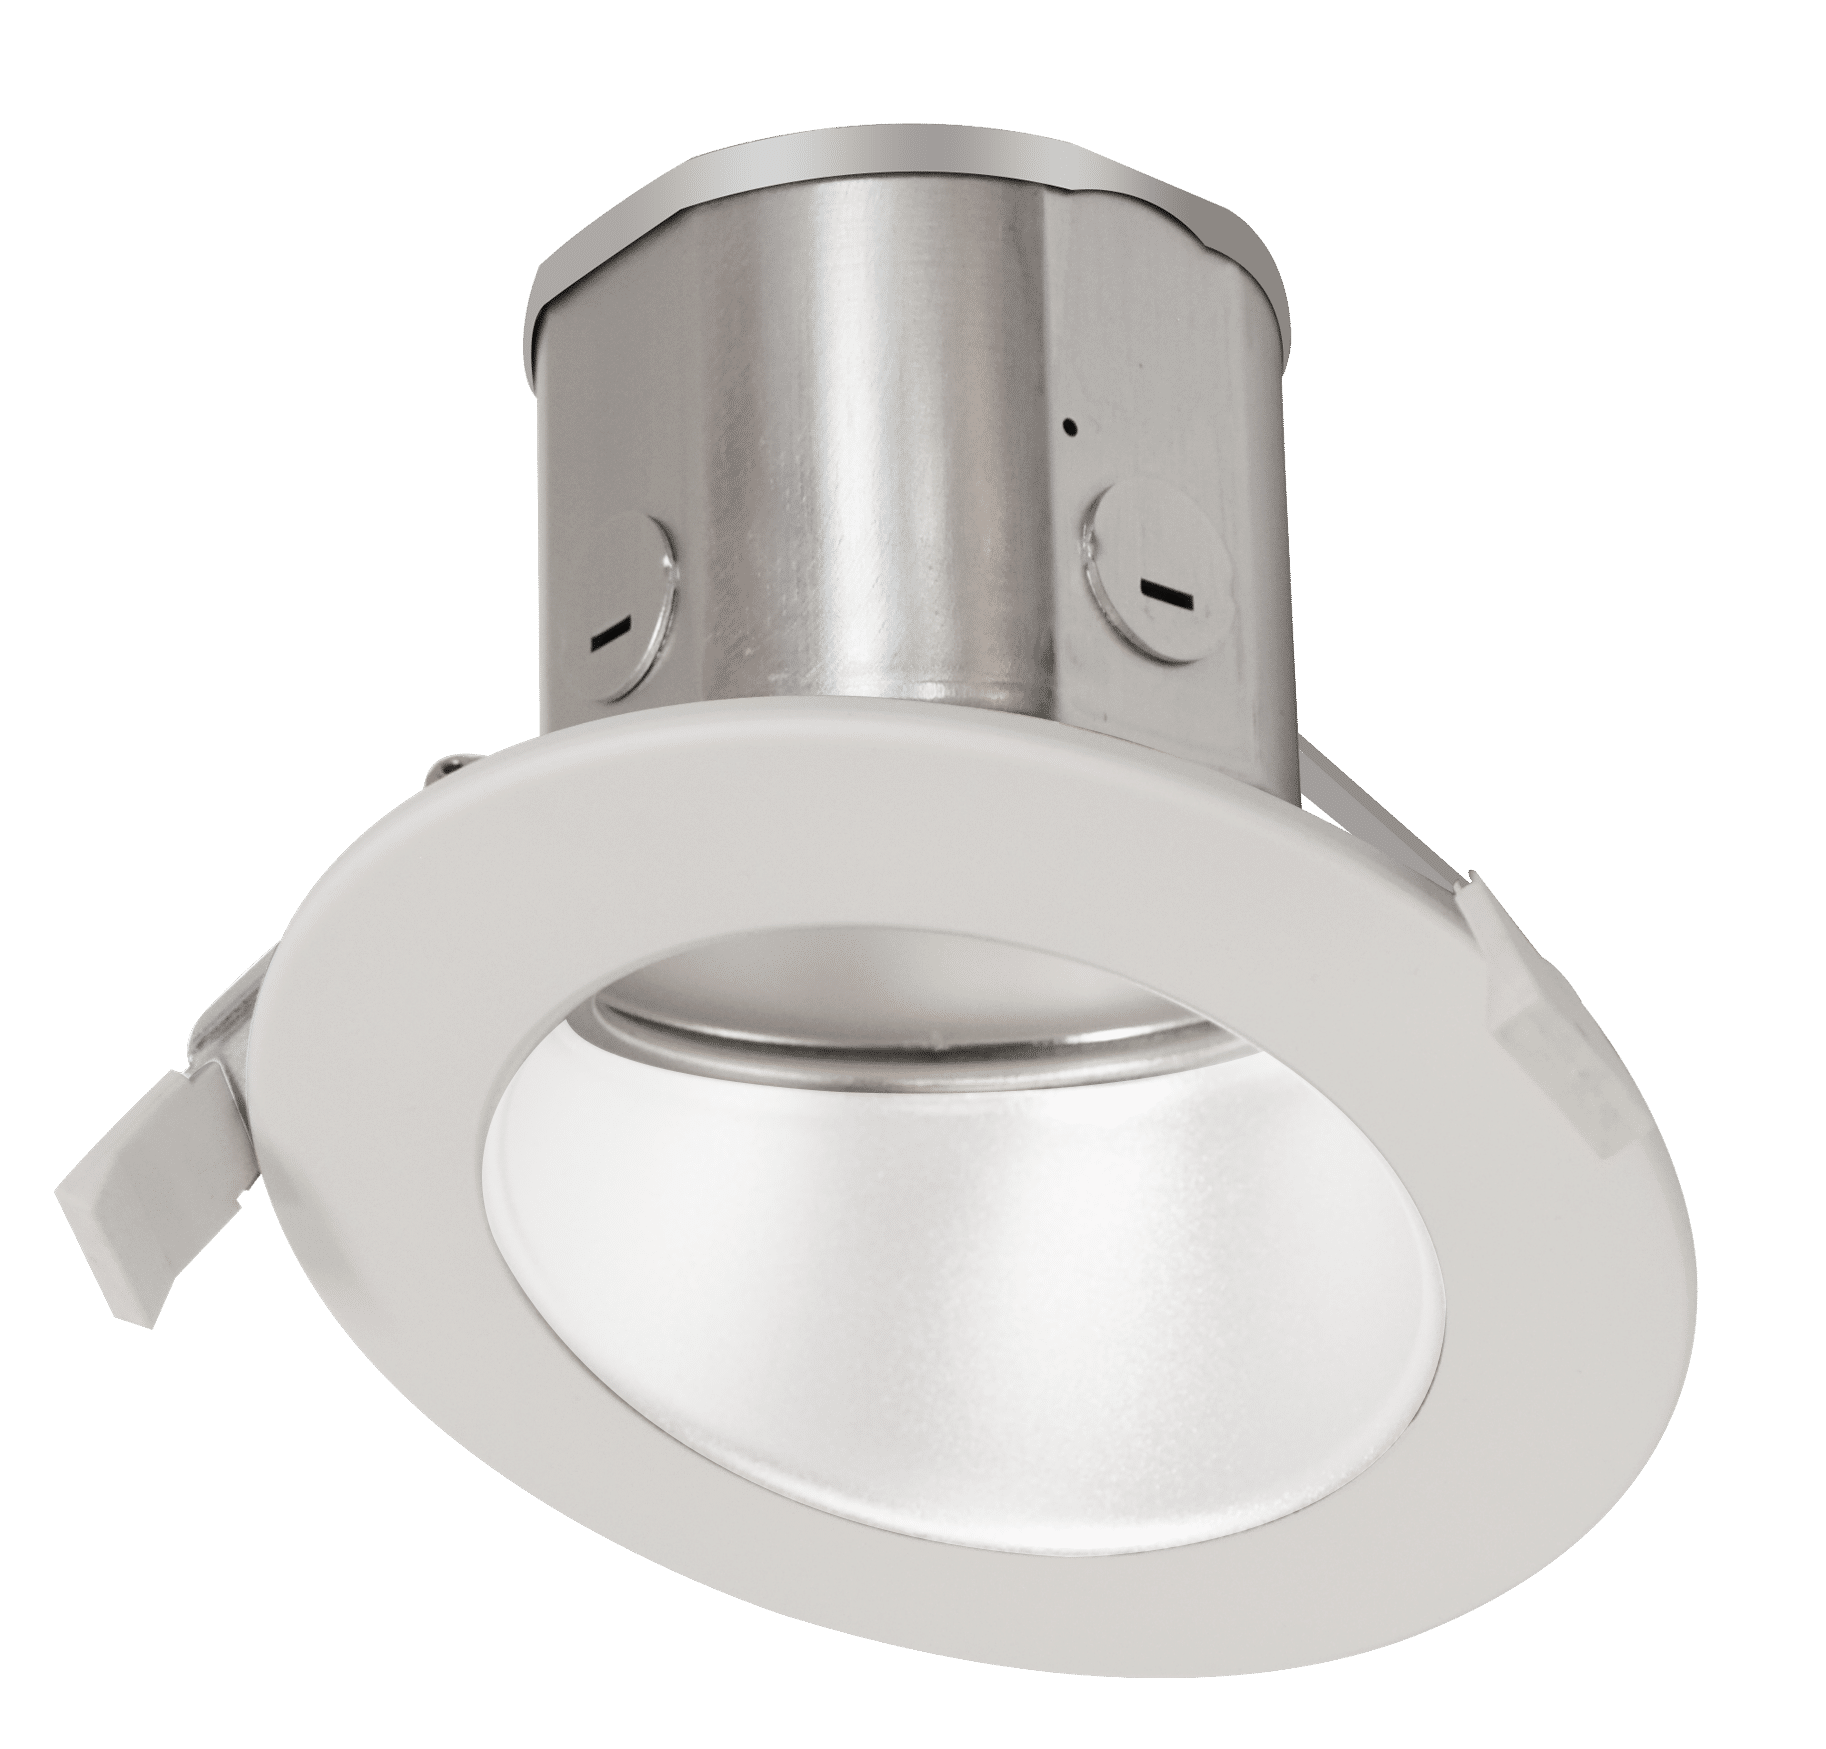 Westgate CRLC4-40W-MCTP-A-D-WH 4" Round LED Commercial Recessed Light - White